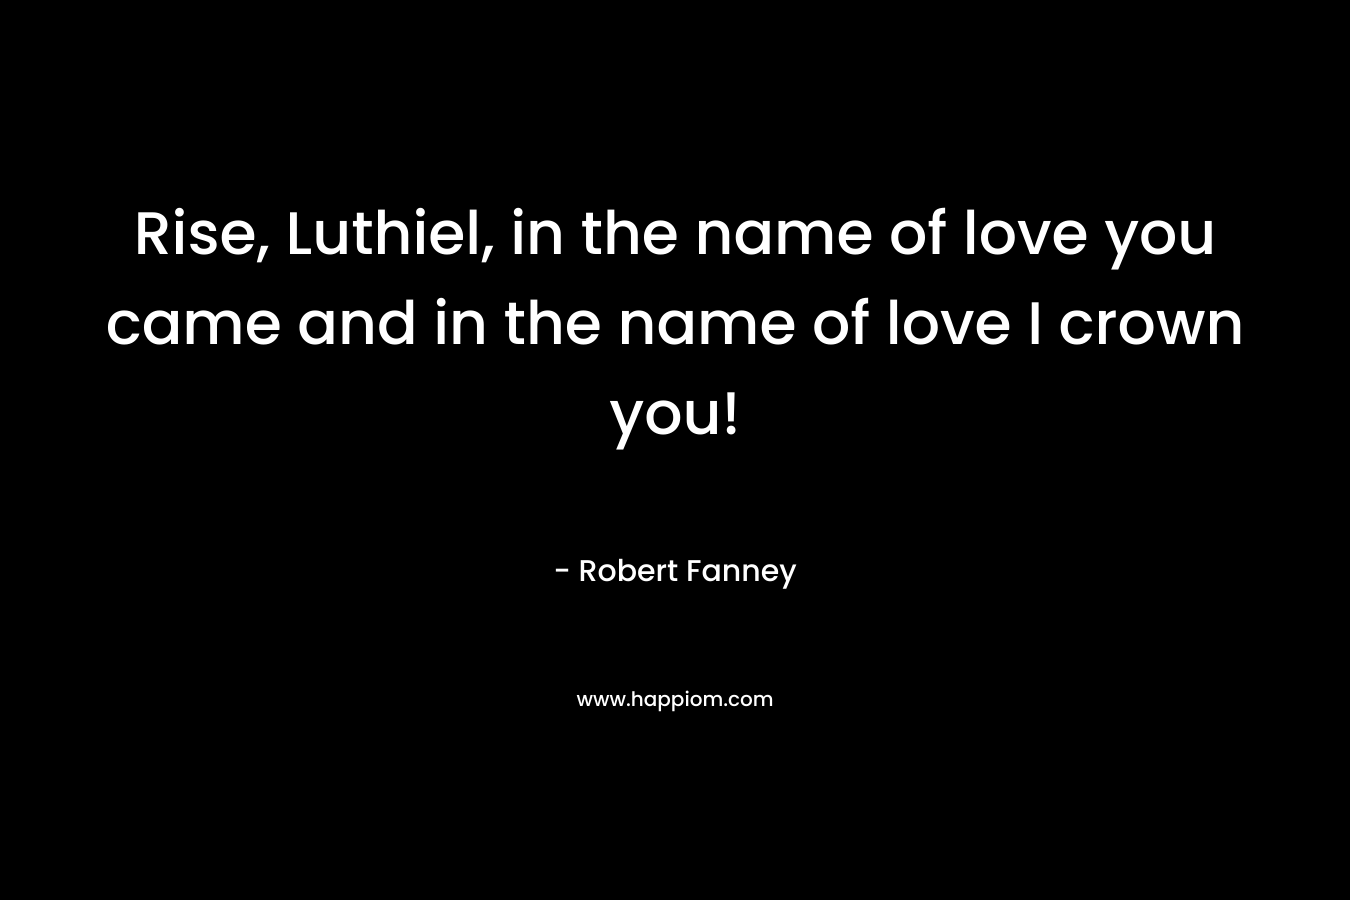 Rise, Luthiel, in the name of love you came and in the name of love I crown you!